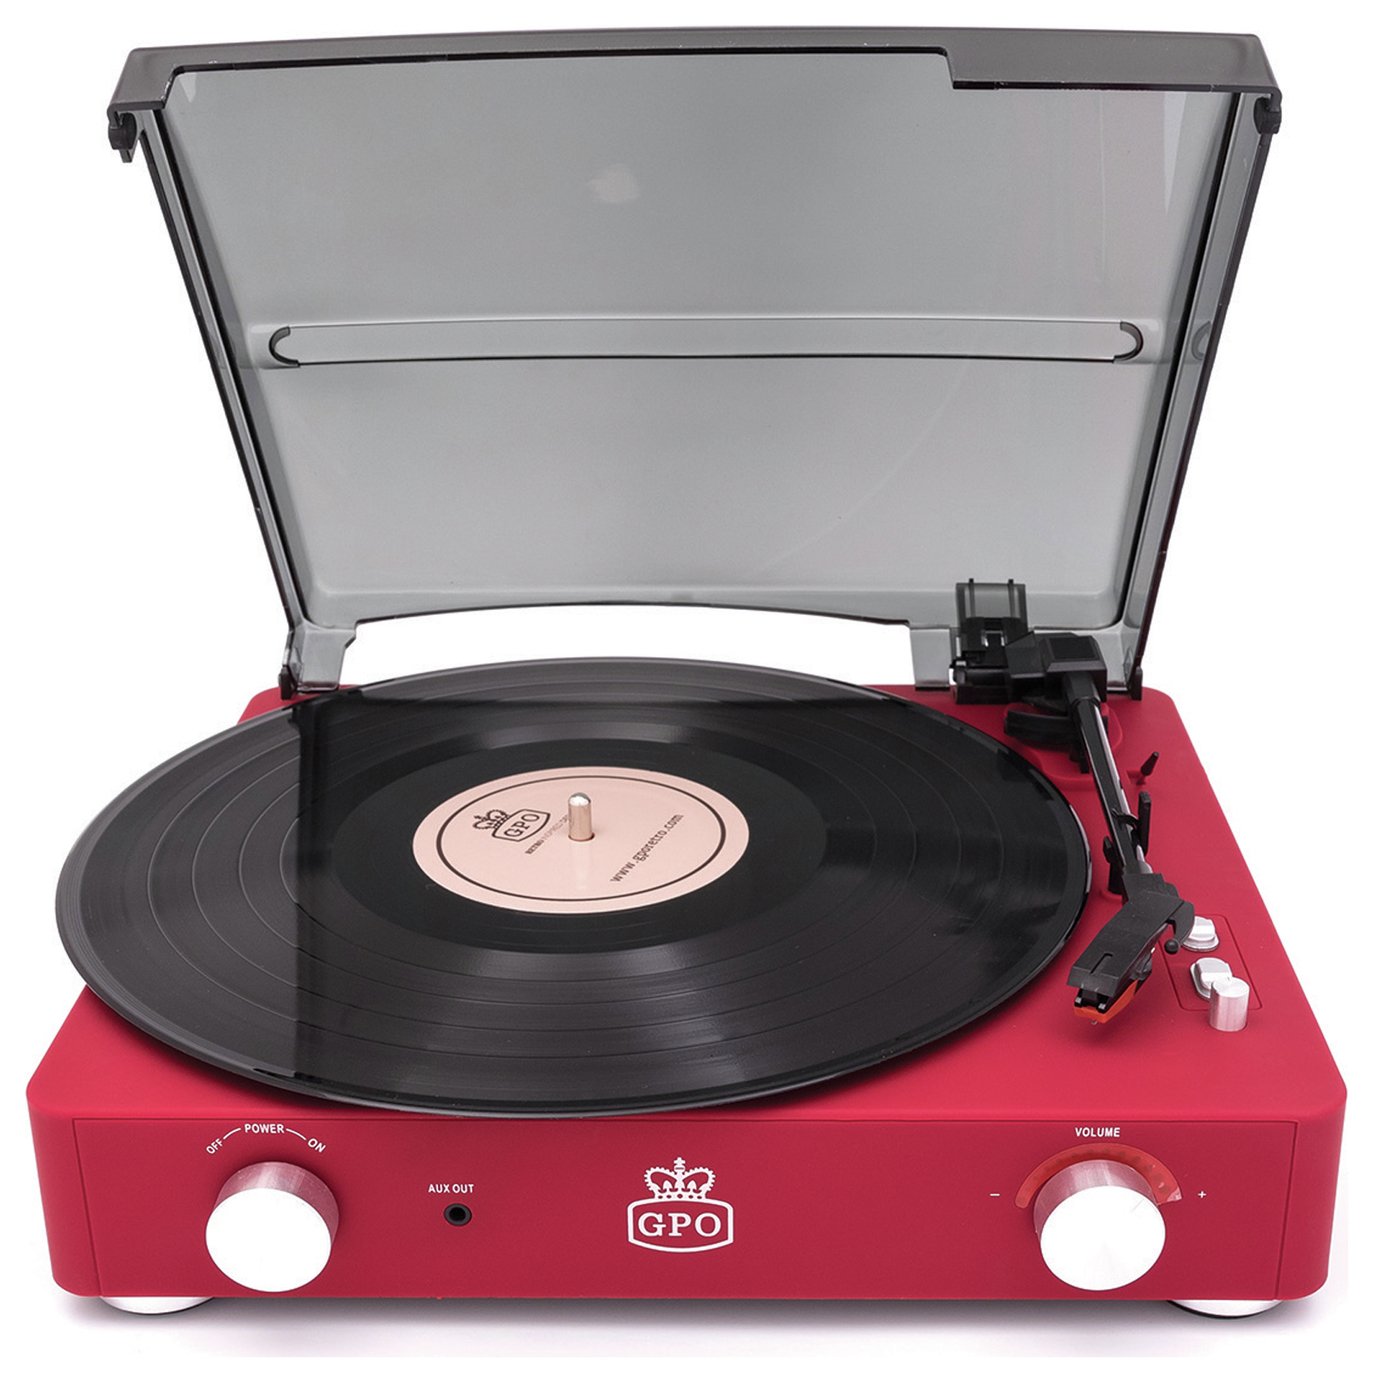 GPO Stylo II Record Player - Red